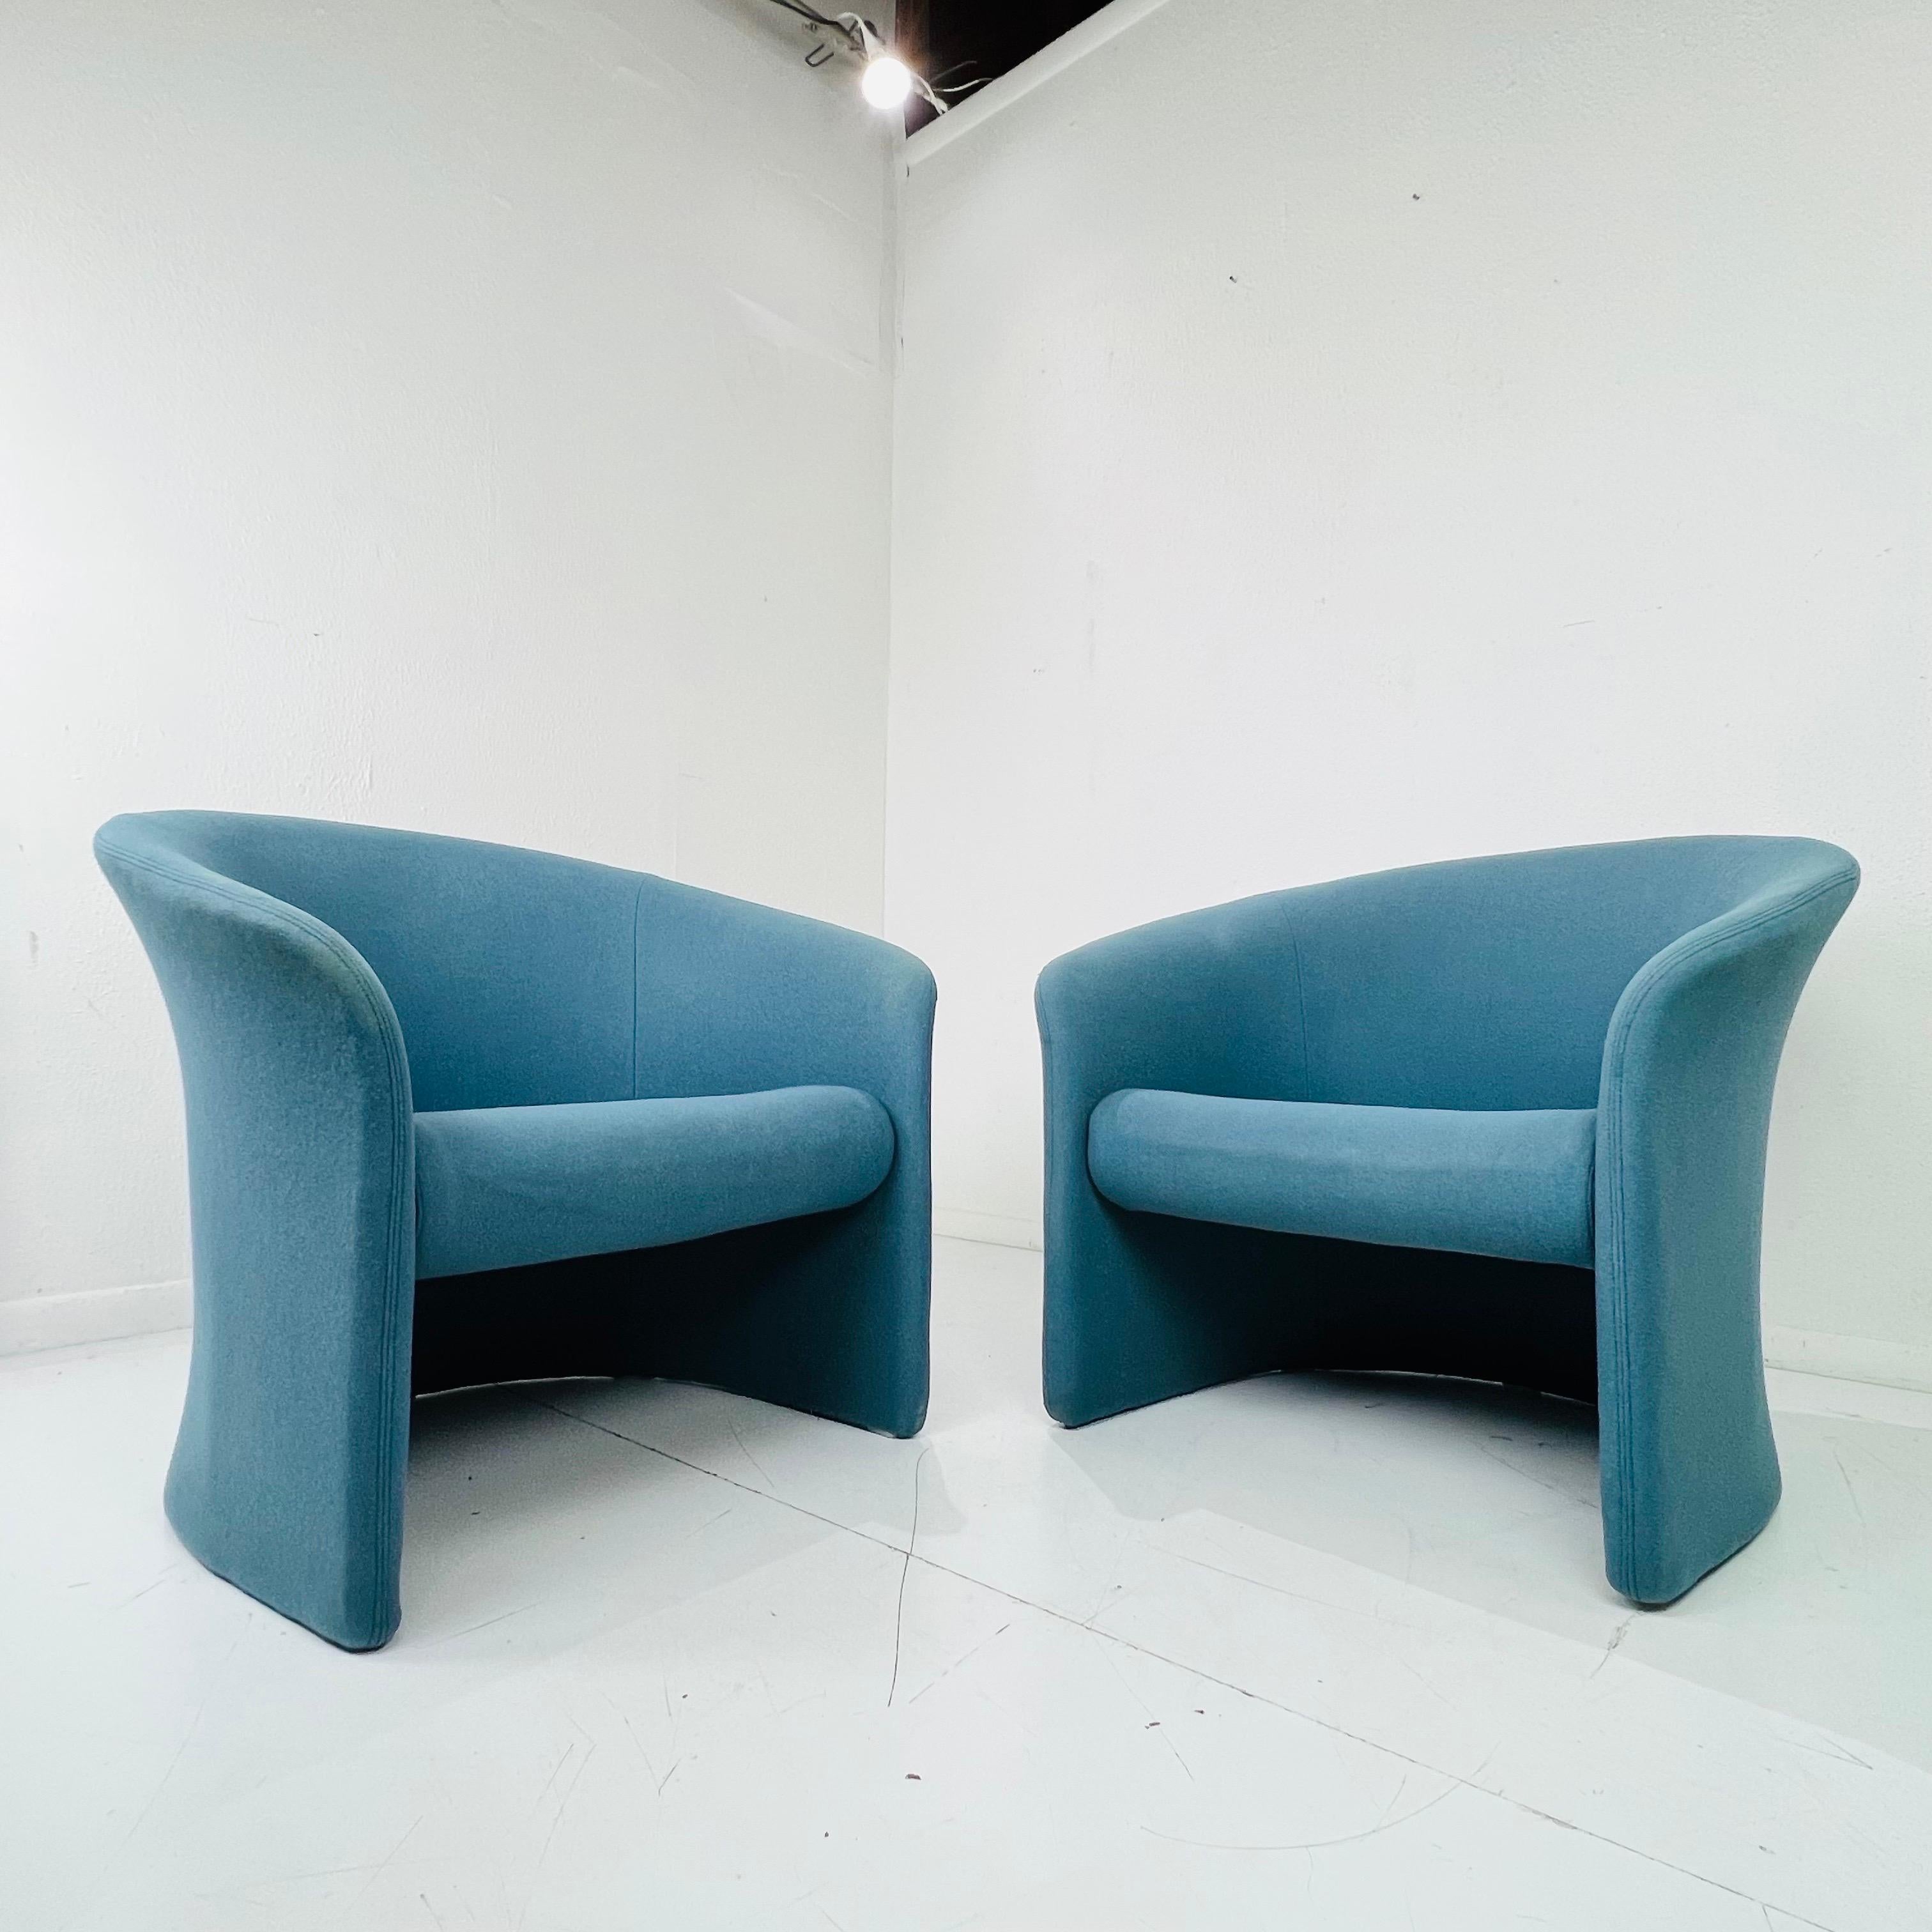 Late 20th Century Pair of Postmodern Tub Chairs by Massimo Vignelli For Sale